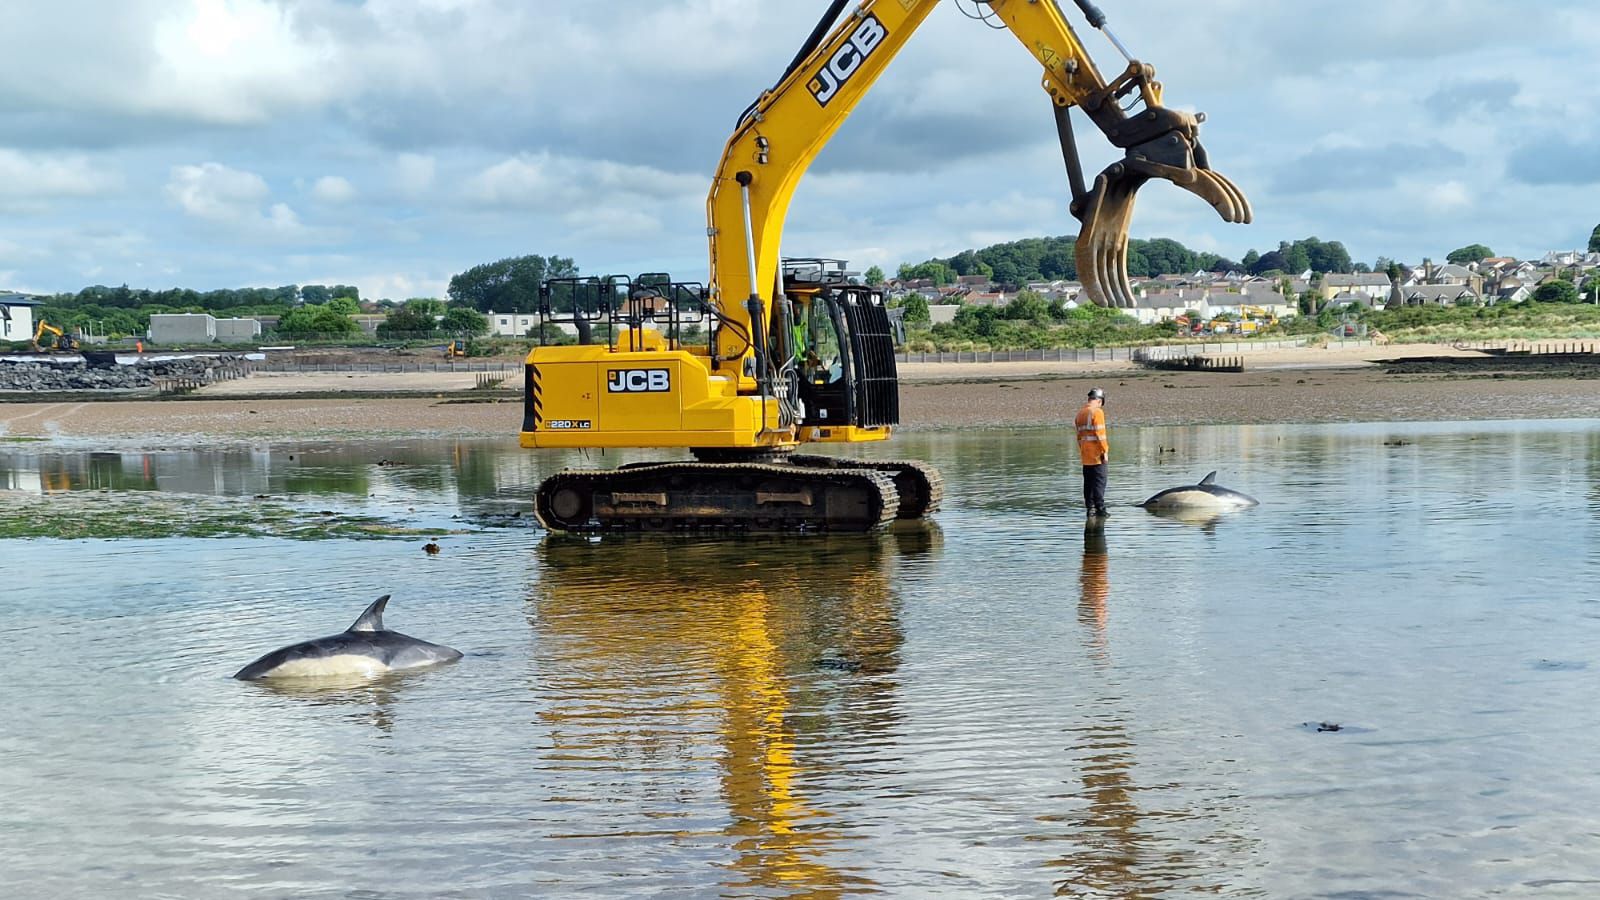 And finally... rescue with a porpoise